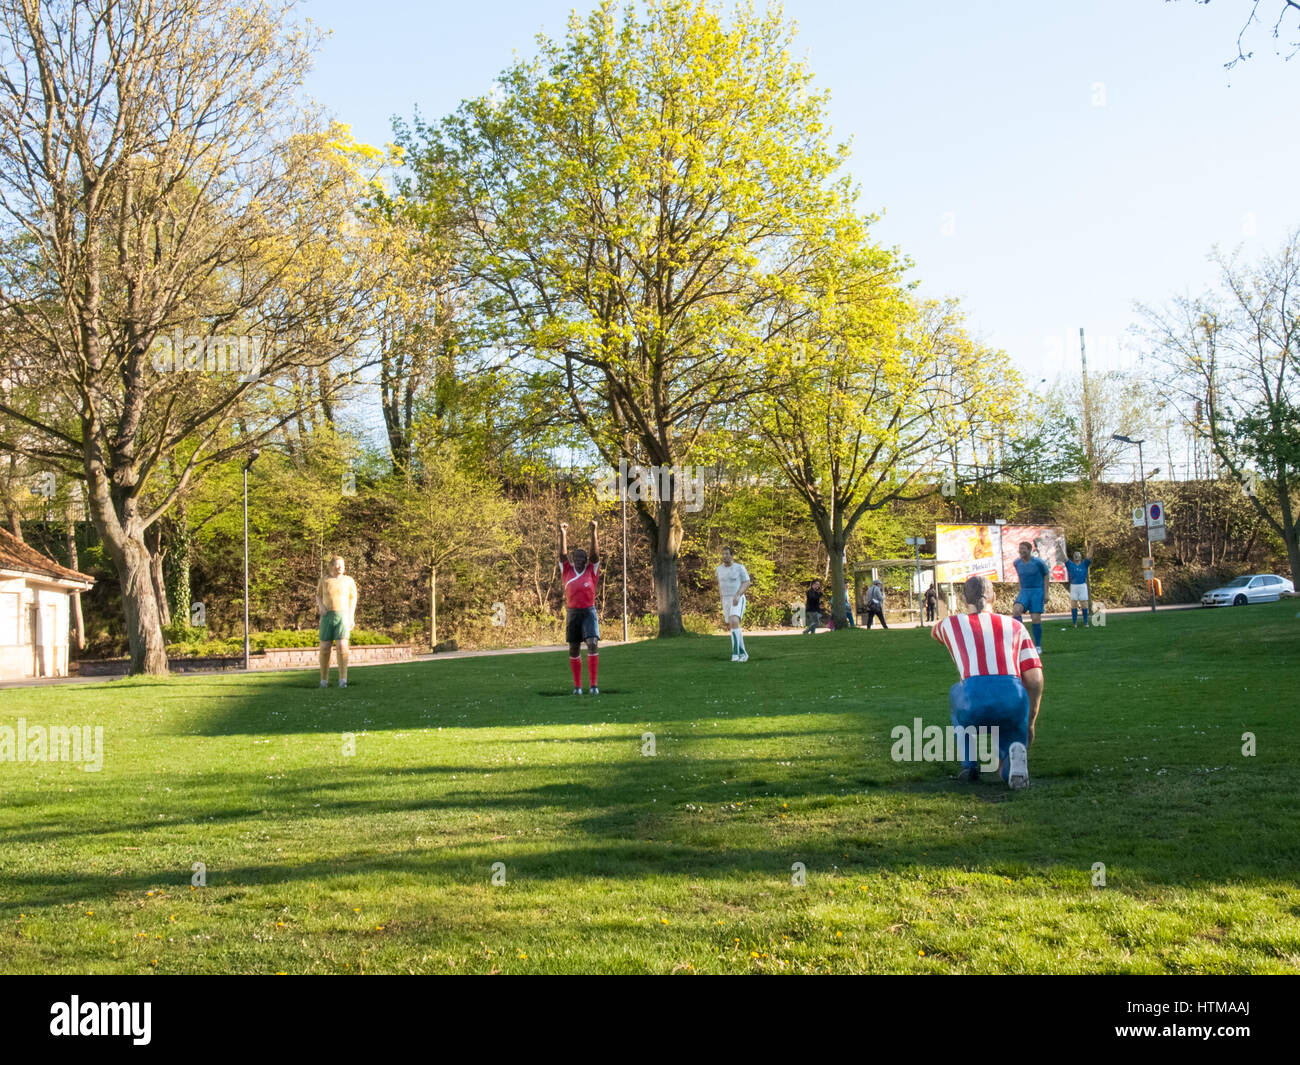 Kaiserslautern, Germany - April 18, 2015: Statues of soccer players are positioned on a public garden. Symbolize the passion that lives this city for  Stock Photo